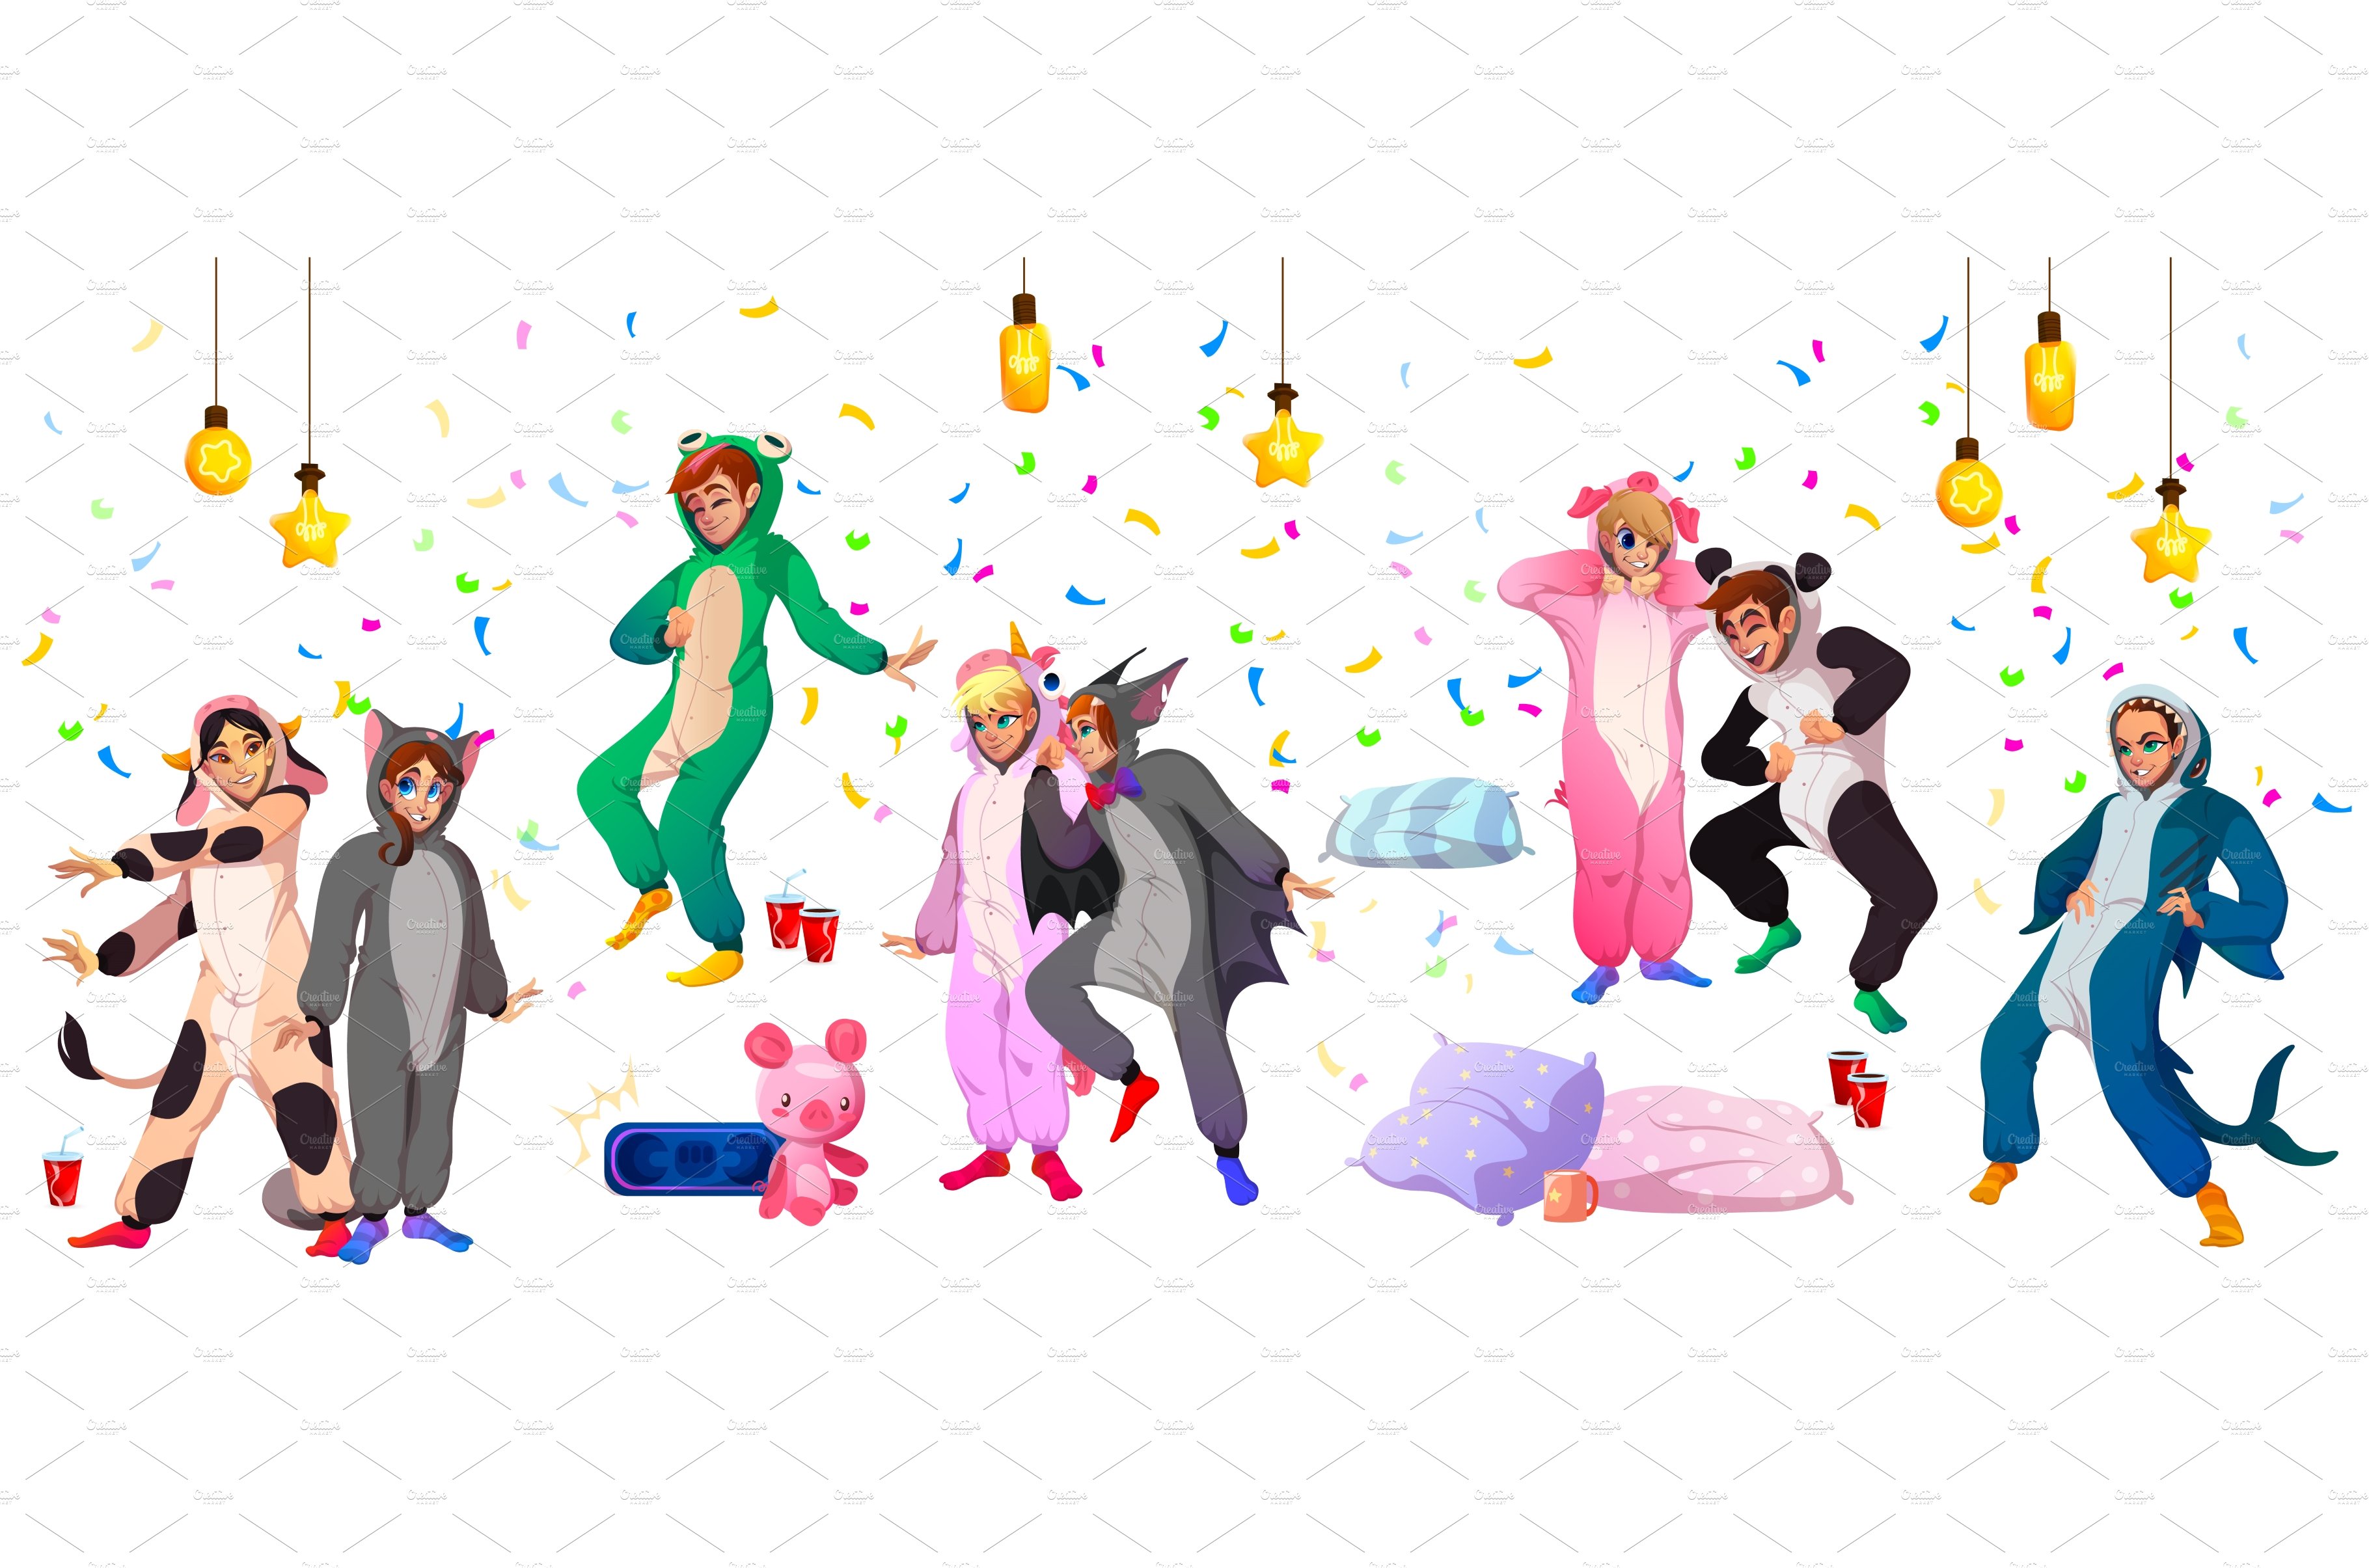 Kigurumi pajama party, youth in cover image.